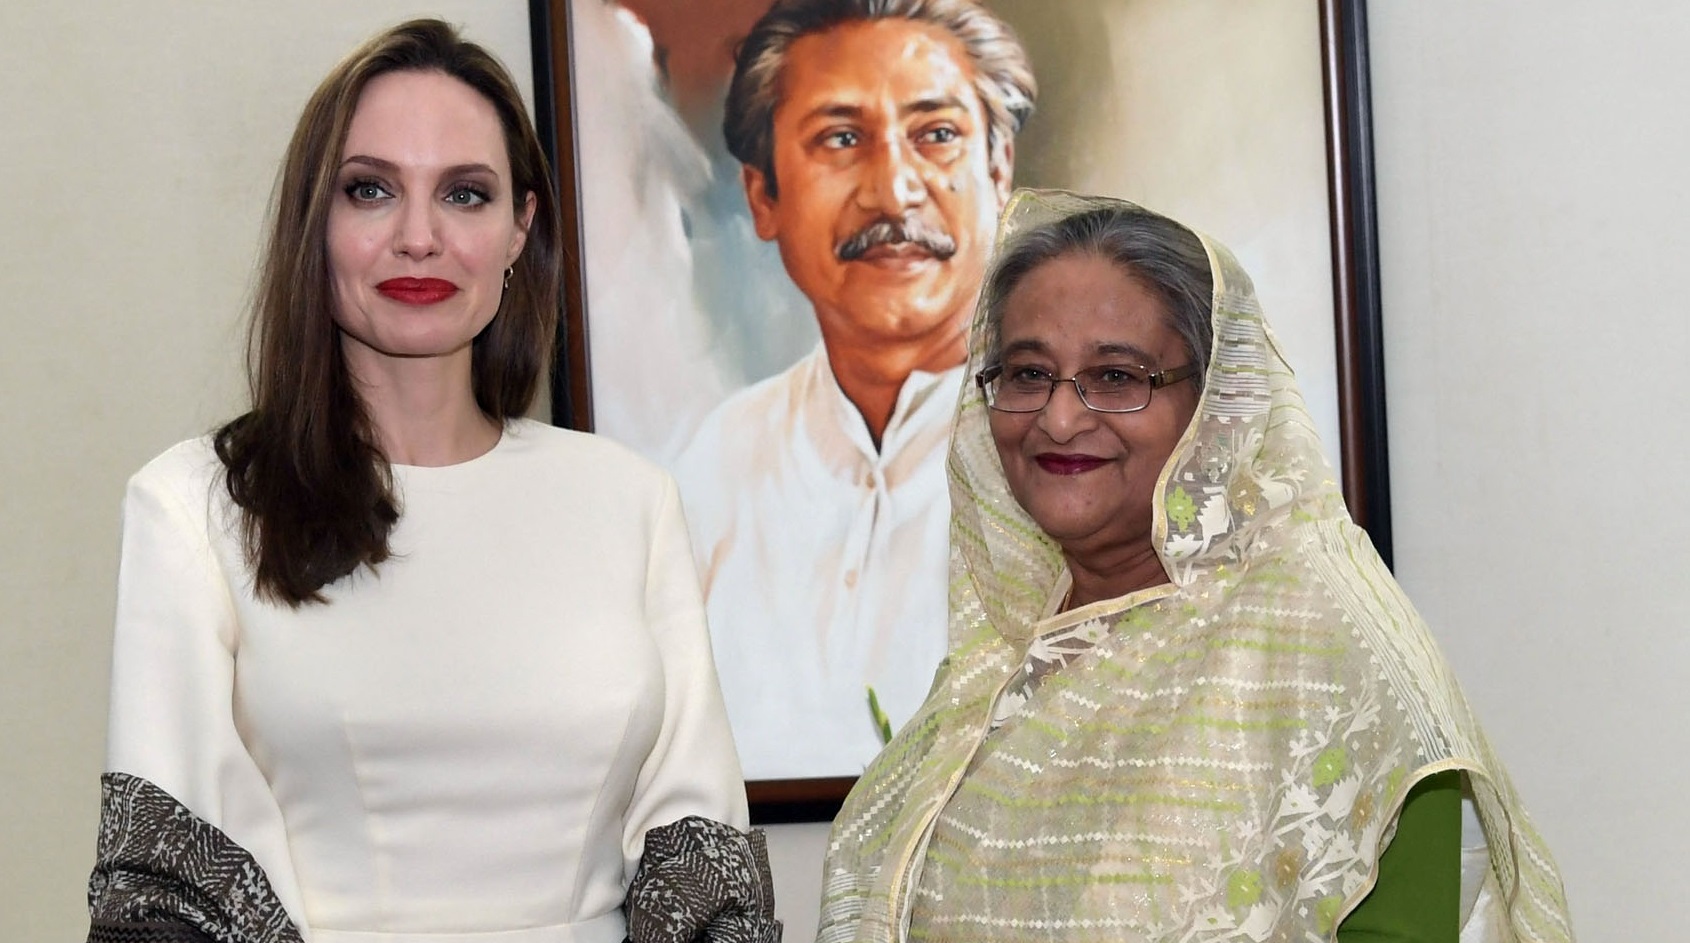 Sheikh Hasina is an iconic leader in the world: Jolie